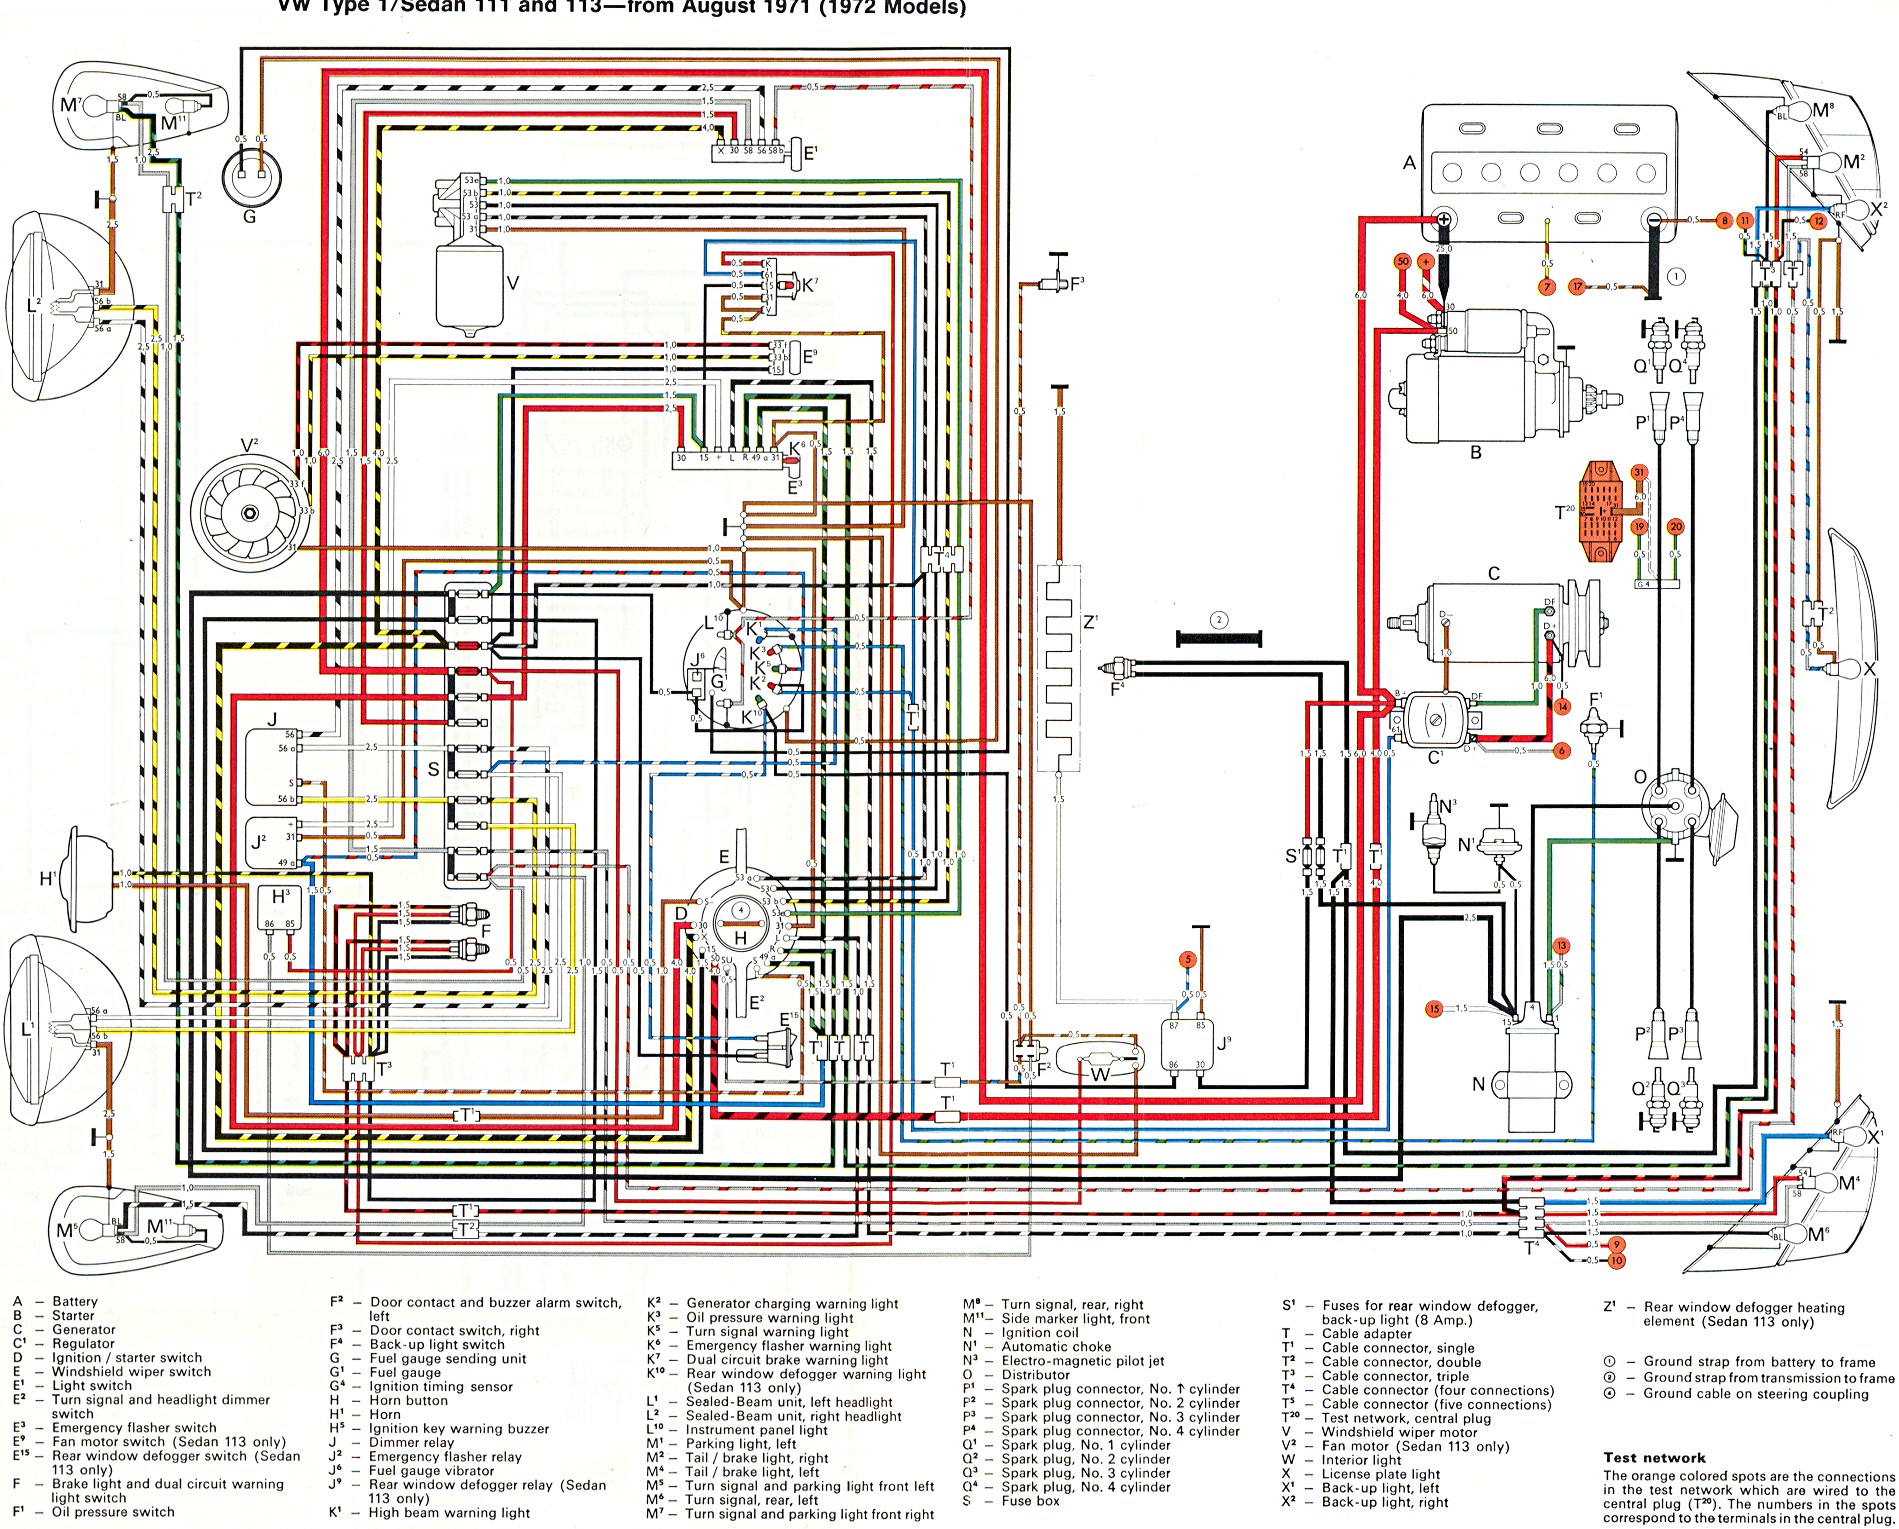 Wiring diagram for fiat doblo 1.2 what colour are the wires - Fixya